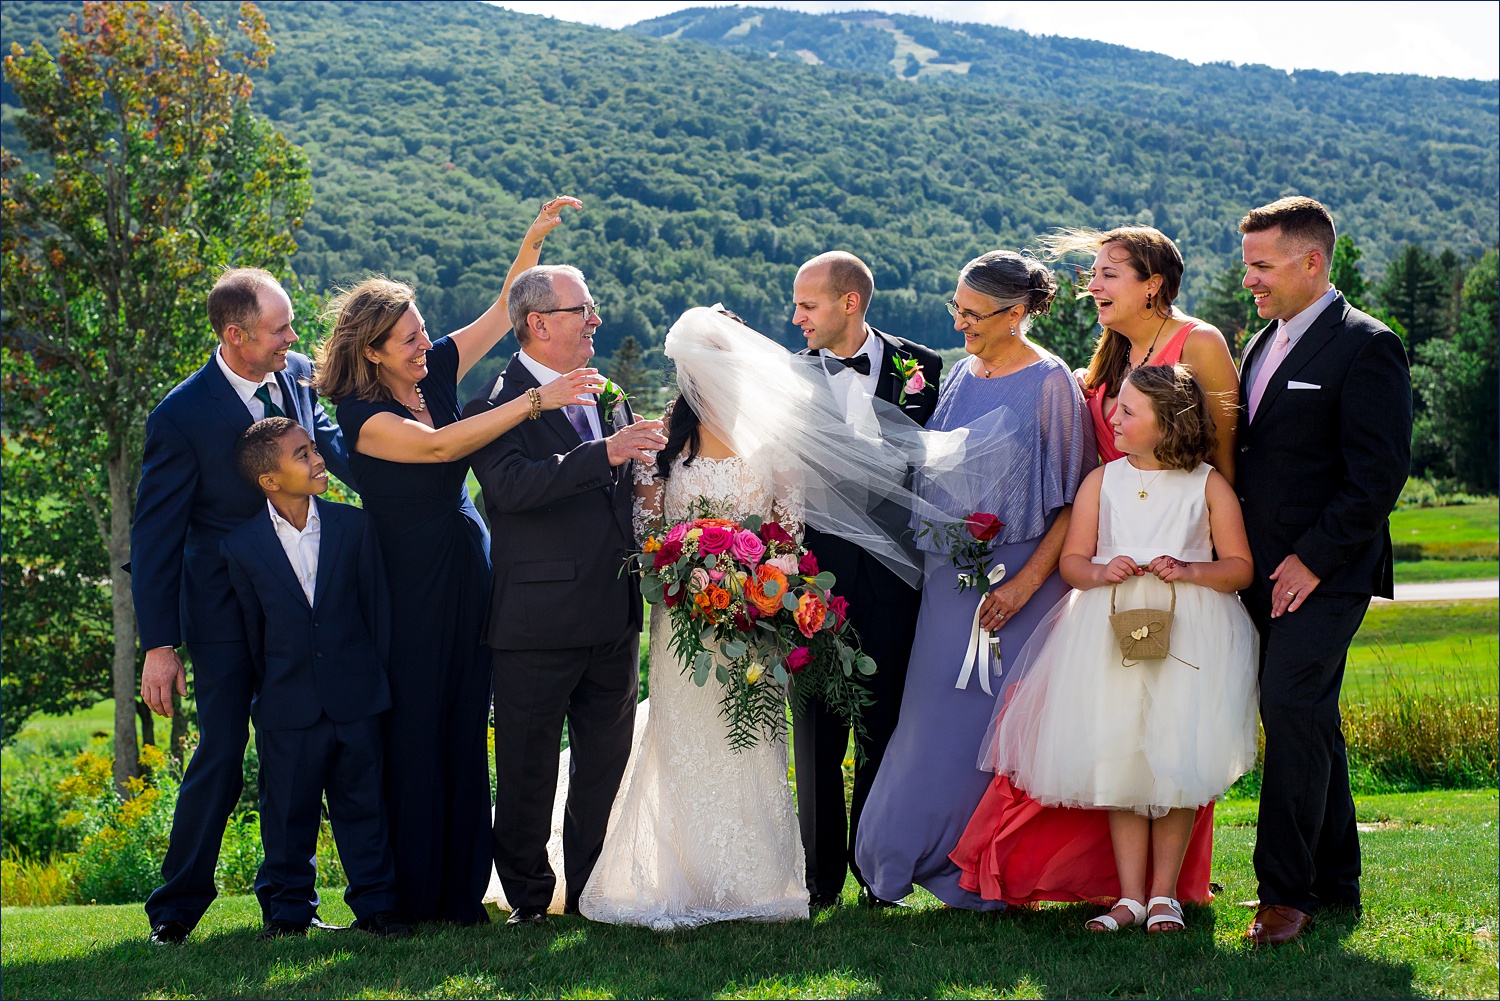 The bride's veil goes wild during the formal family photos in NH